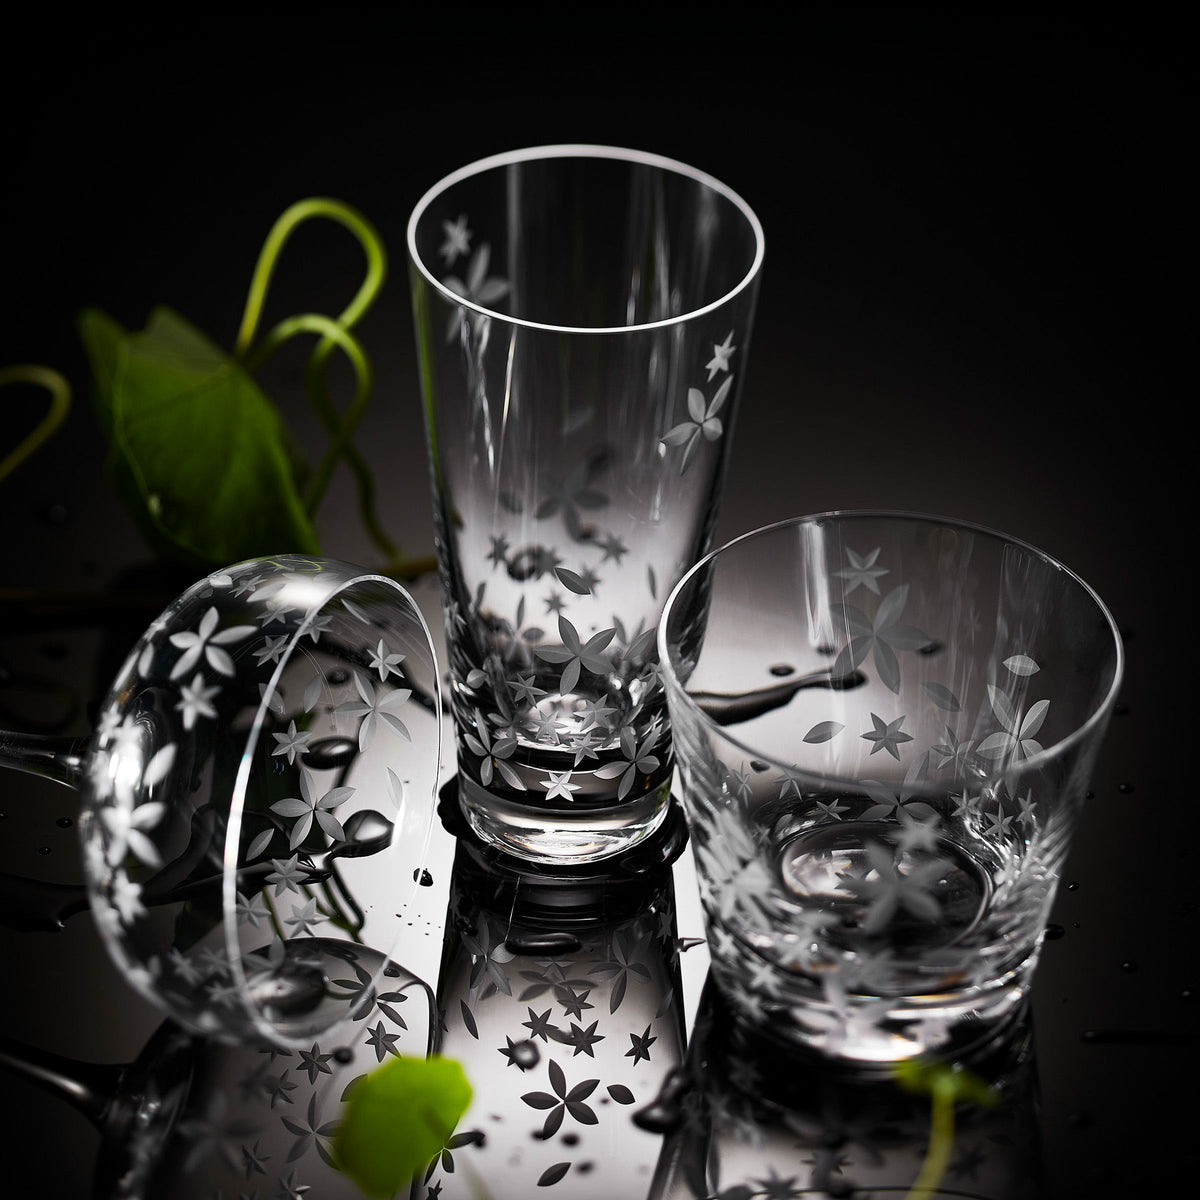 A set of Chatham Bloom Highball Glasses from the Caskata brand, with leaves and water on a black surface.